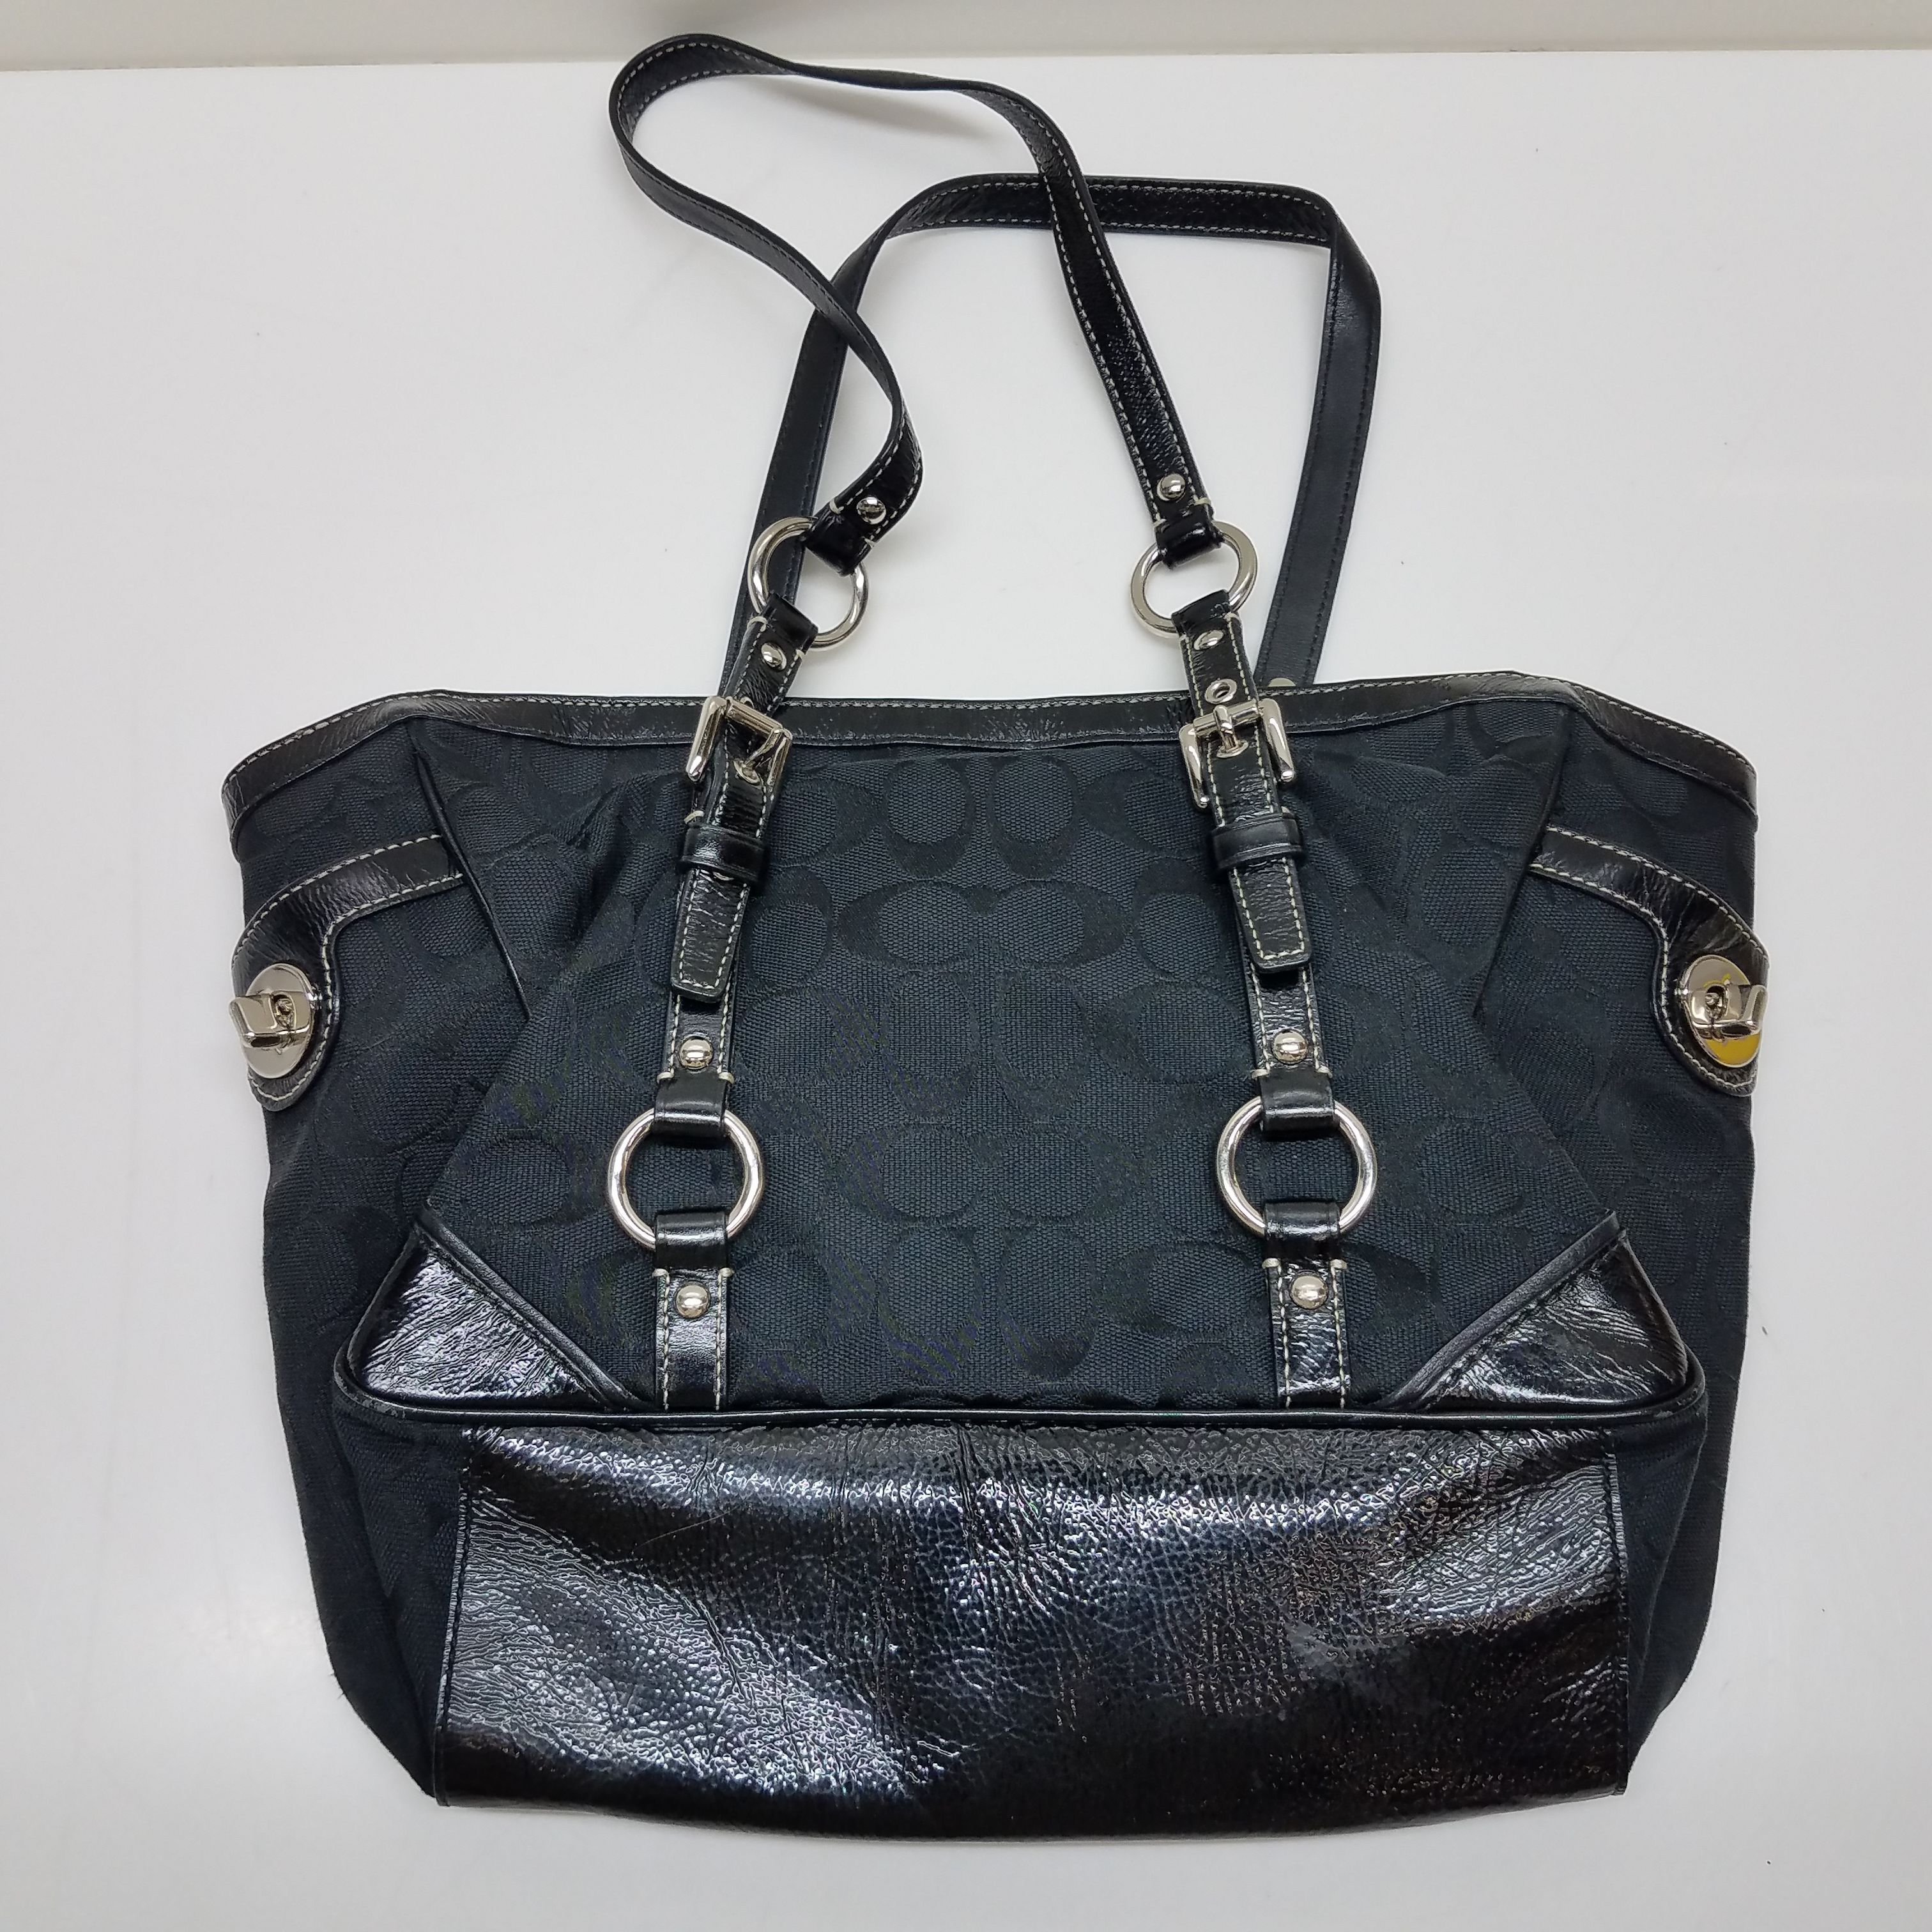 Cute Coach bags | Gallery posted by Lilzdesmarie | Lemon8